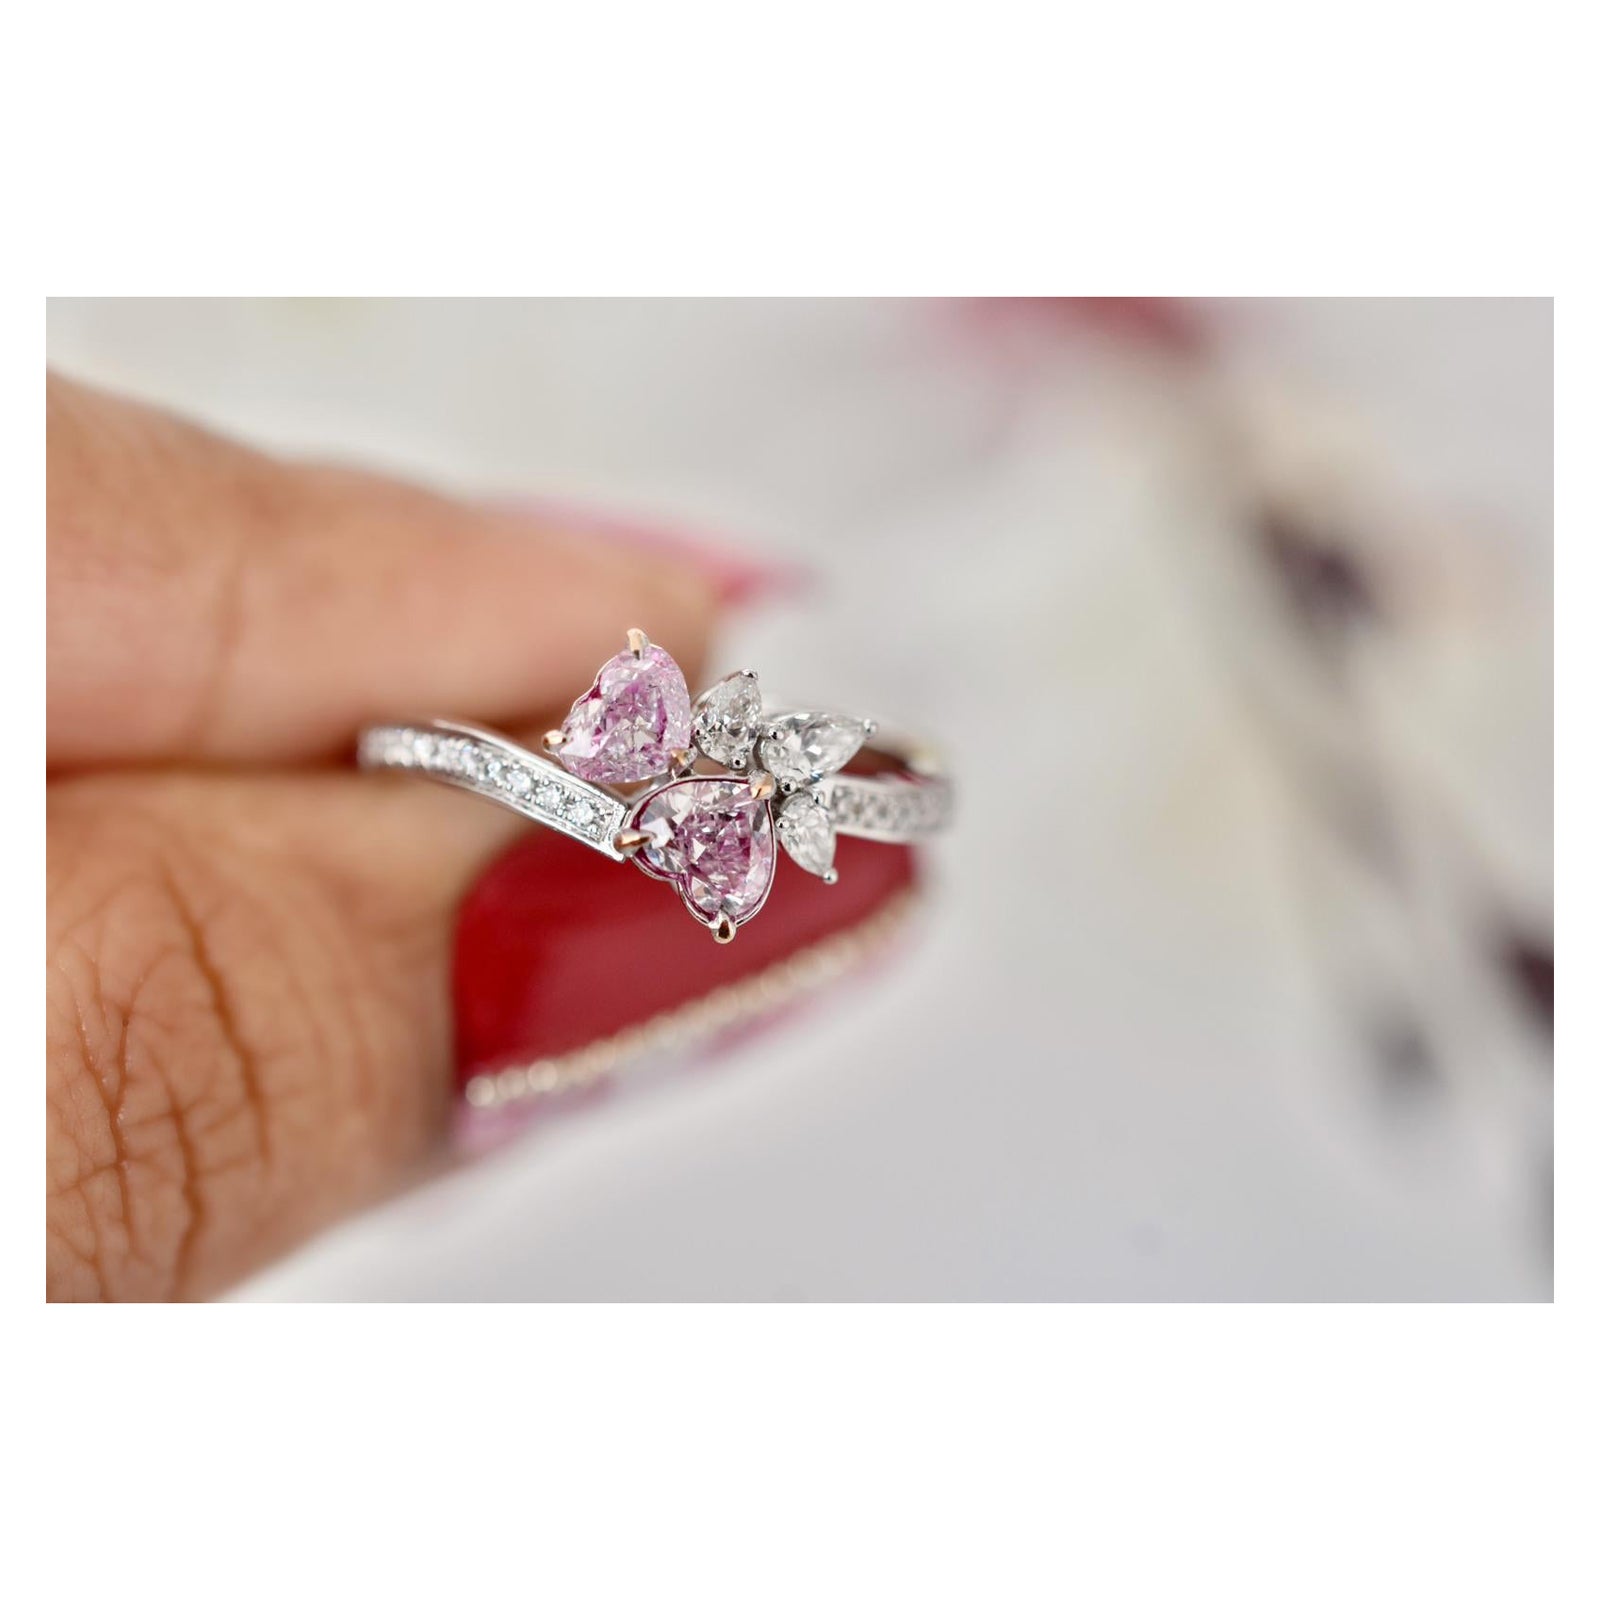 0.55 Carat Faint Pink Diamond Cocktail Ring GIA Certified For Sale